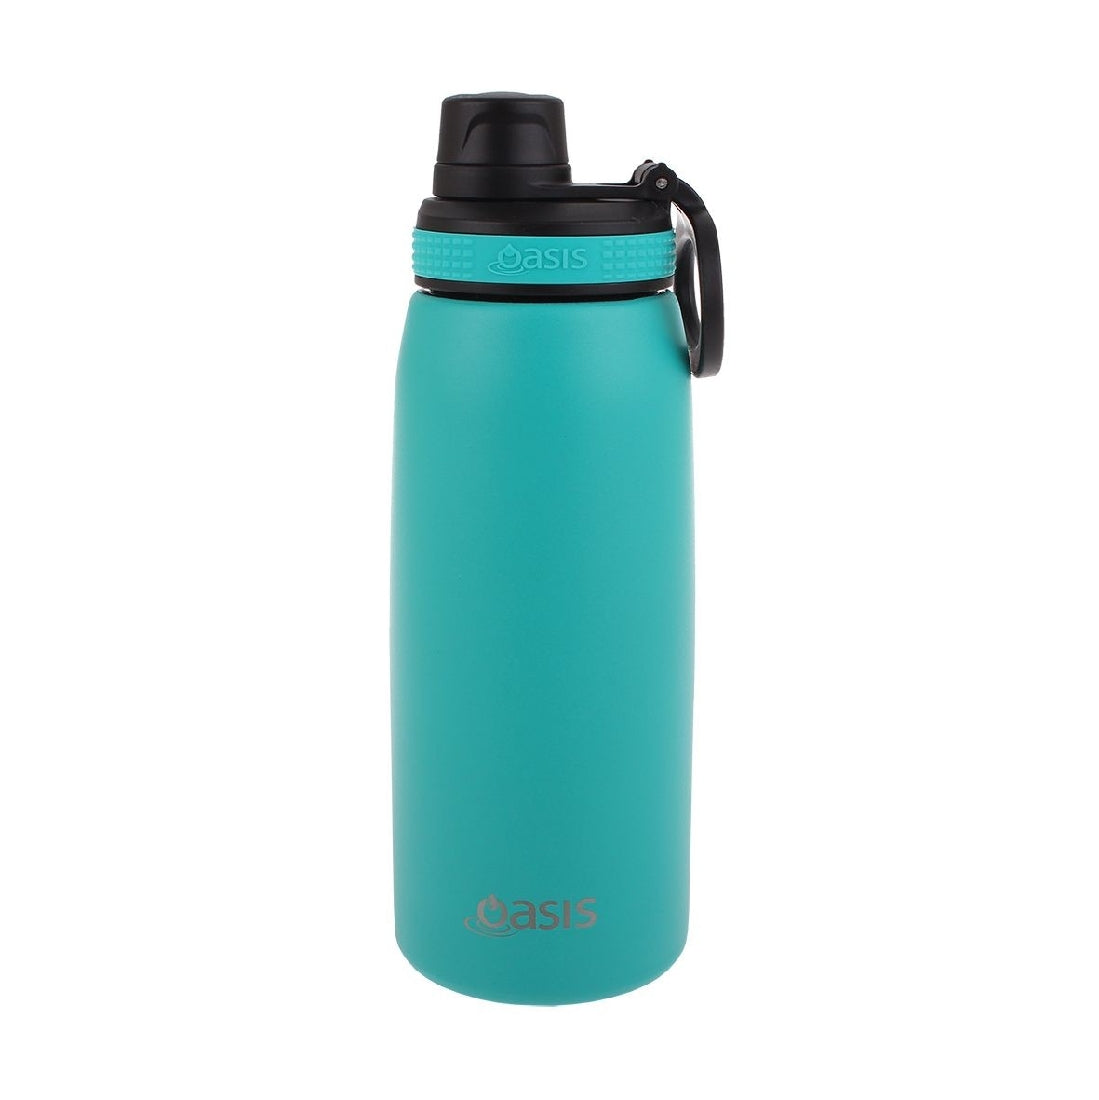 Oasis S/s Double Wall Insulated Sports Bottle W/ Screw-cap 780ml - Turquoise